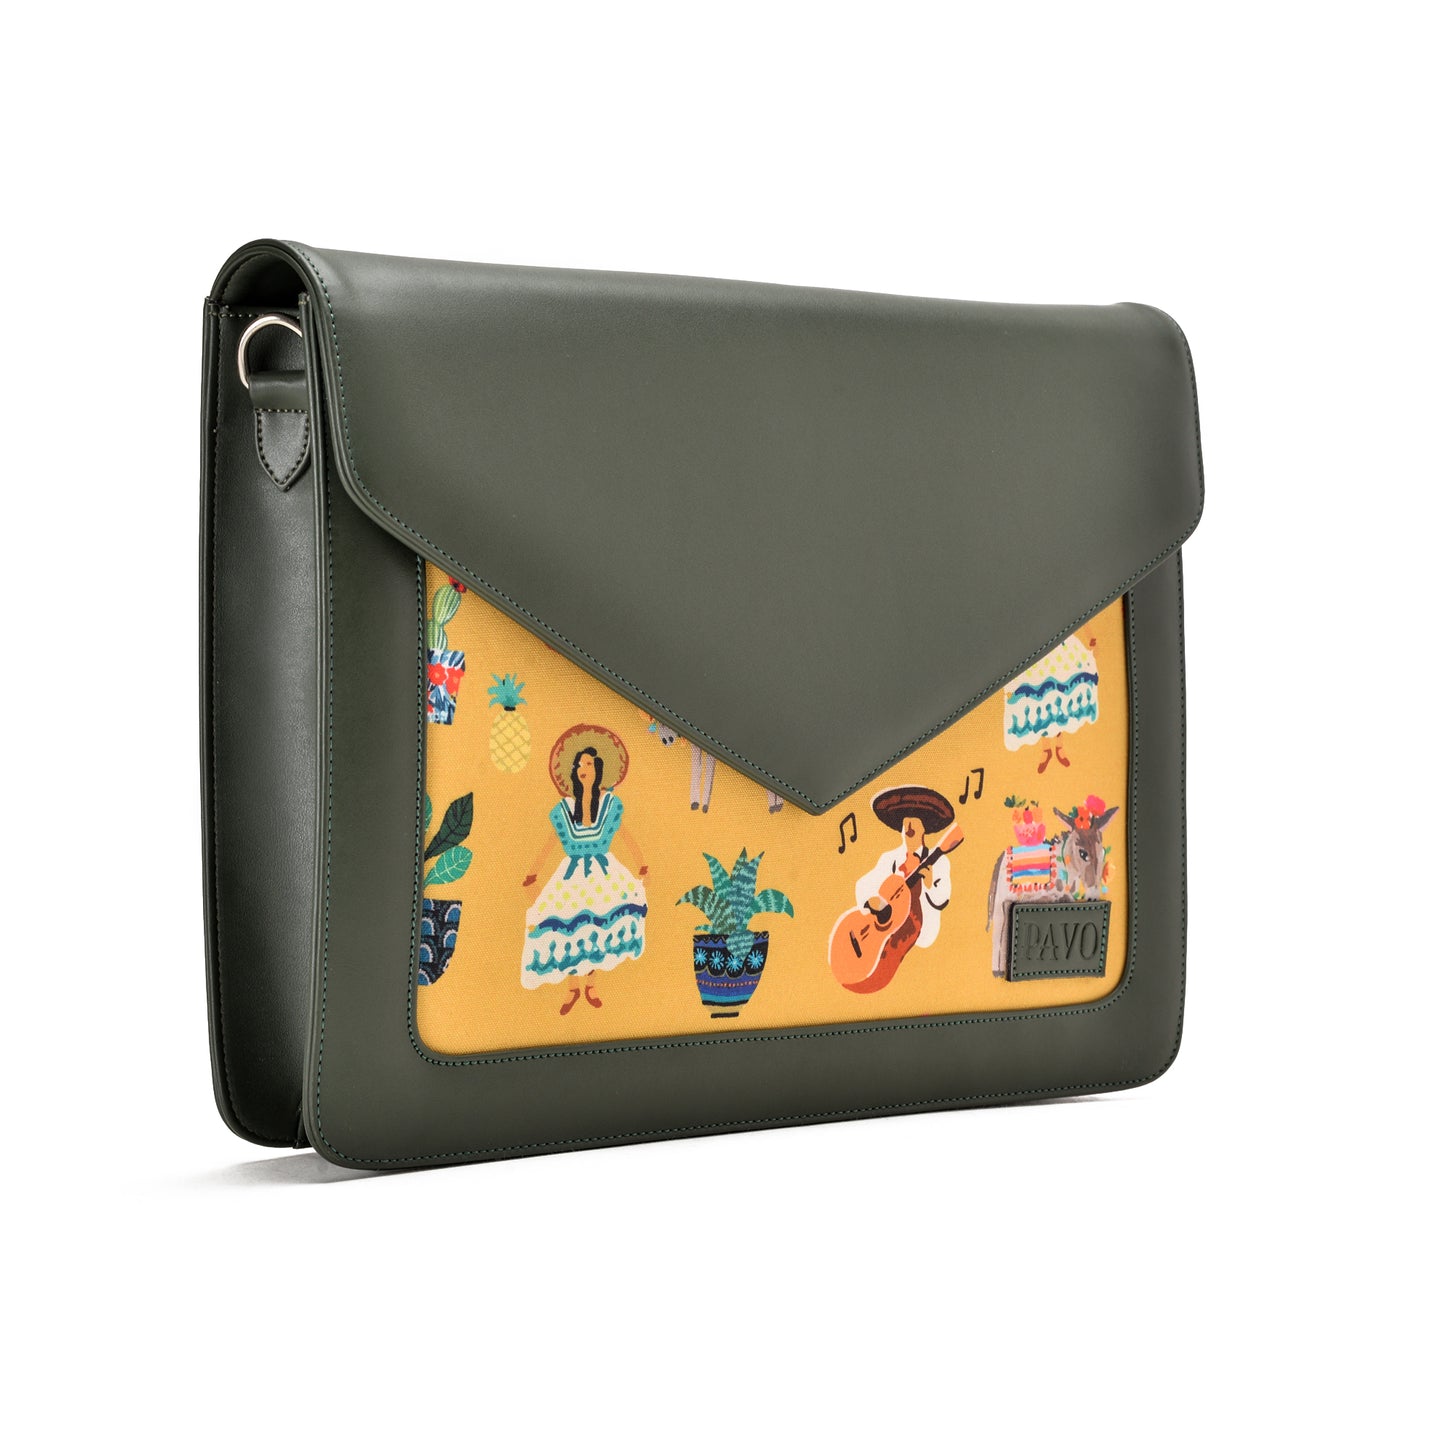 Laptop Bag/Sleeve Olive Green with Multi colour Fabric- Code 102